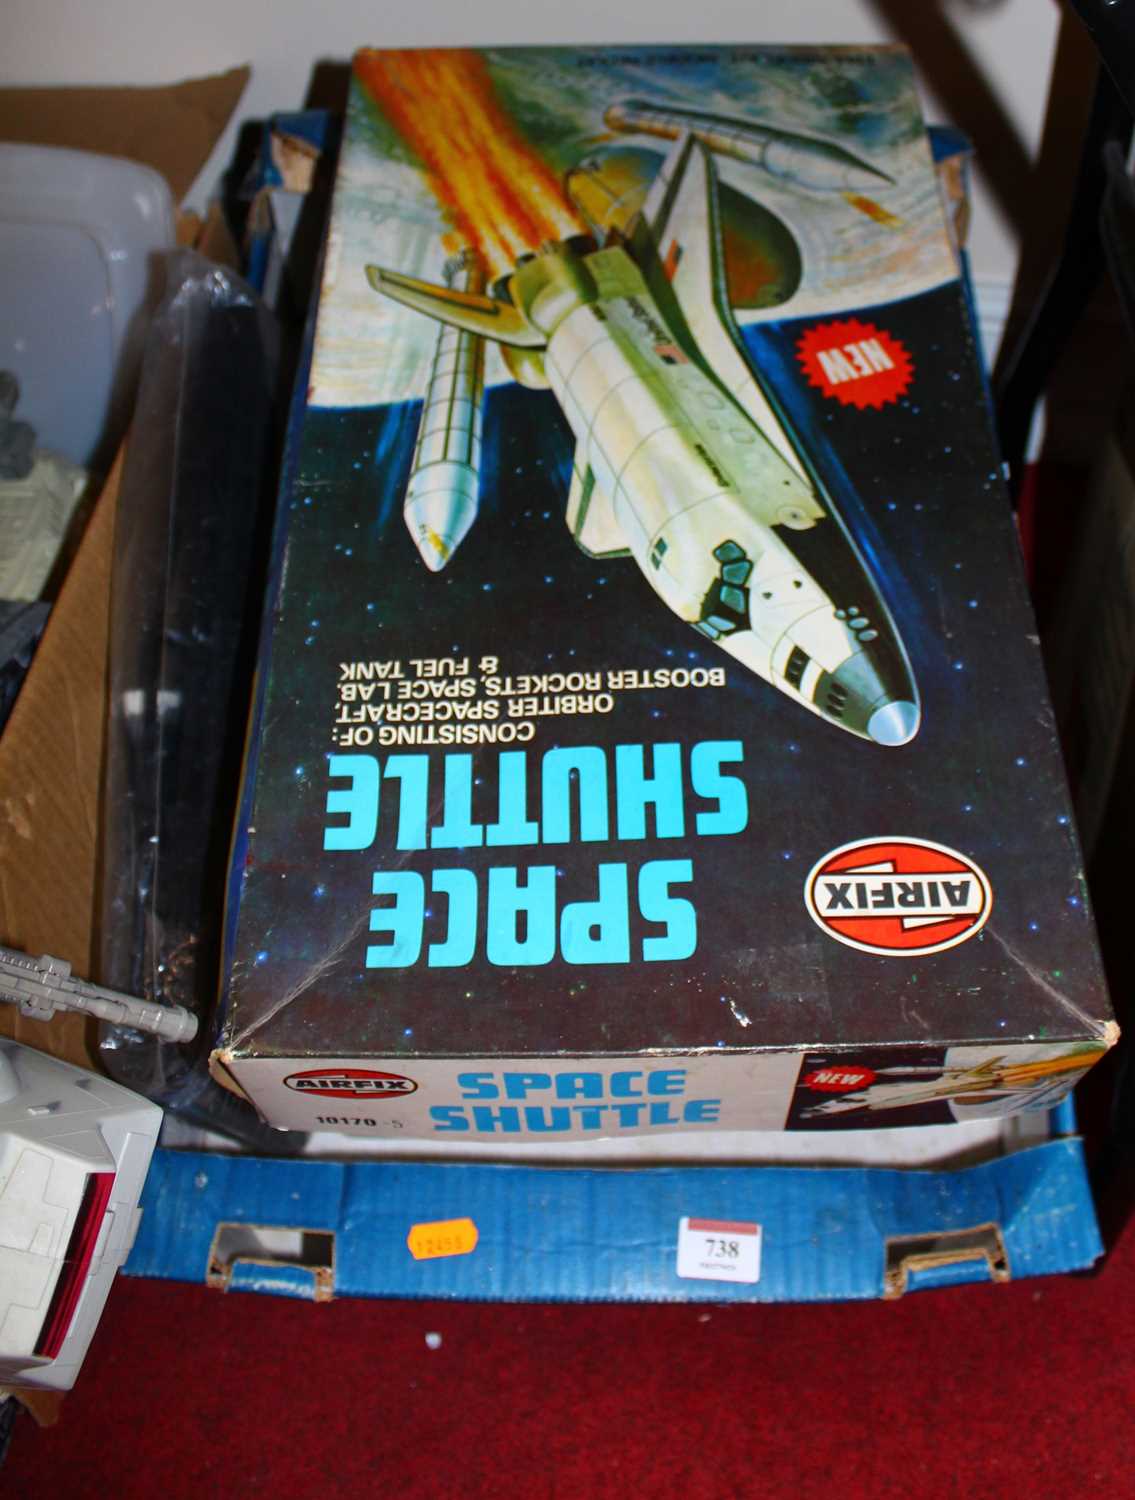 An Airfix boxed model kit for a Space Shuttle, together with a quantity of various other unboxed - Image 2 of 2